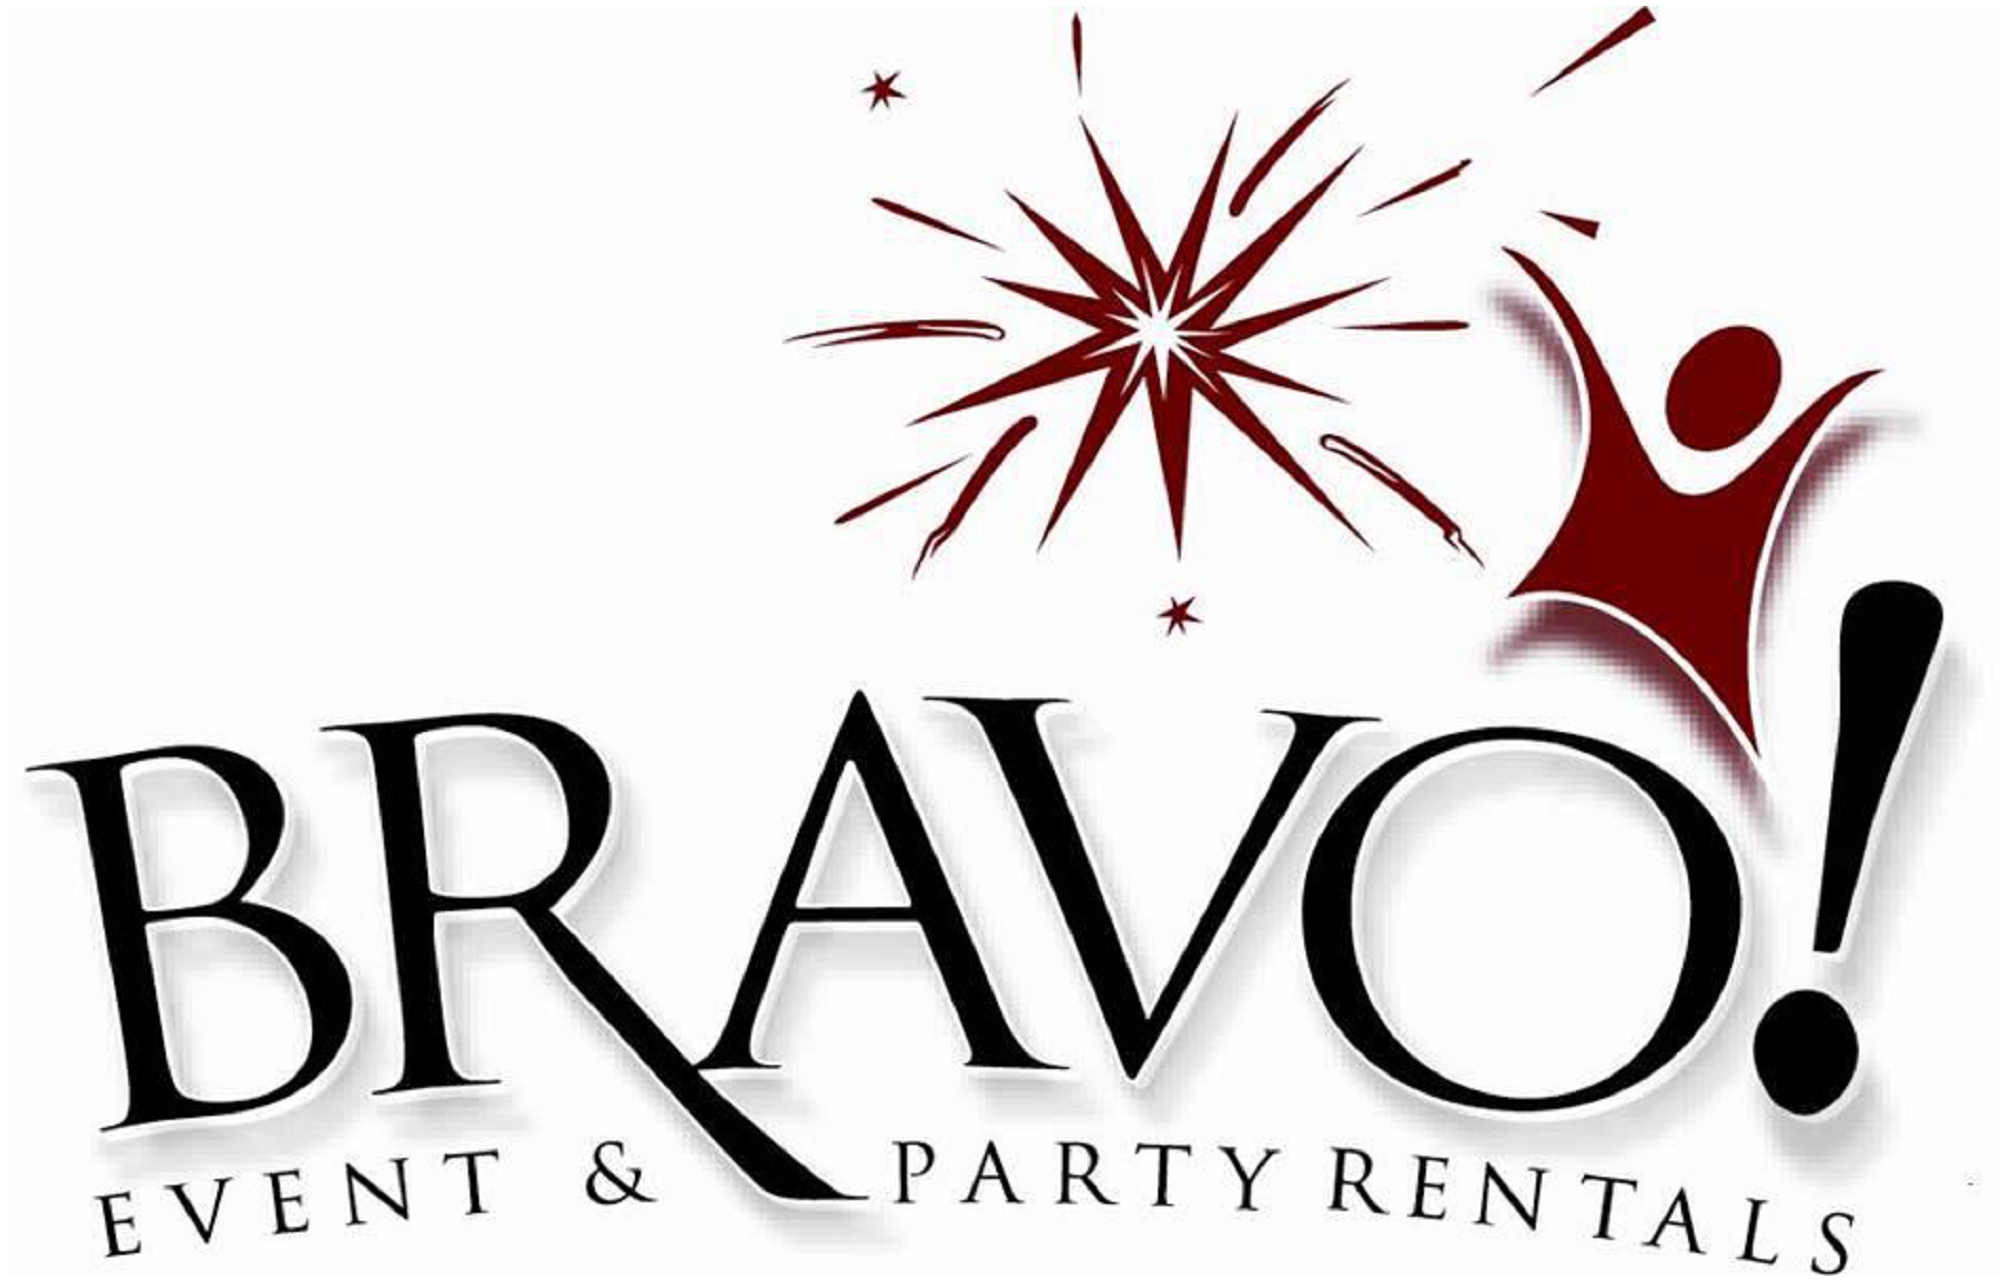 Take a seat with BRAVO Event and Party Rentals!